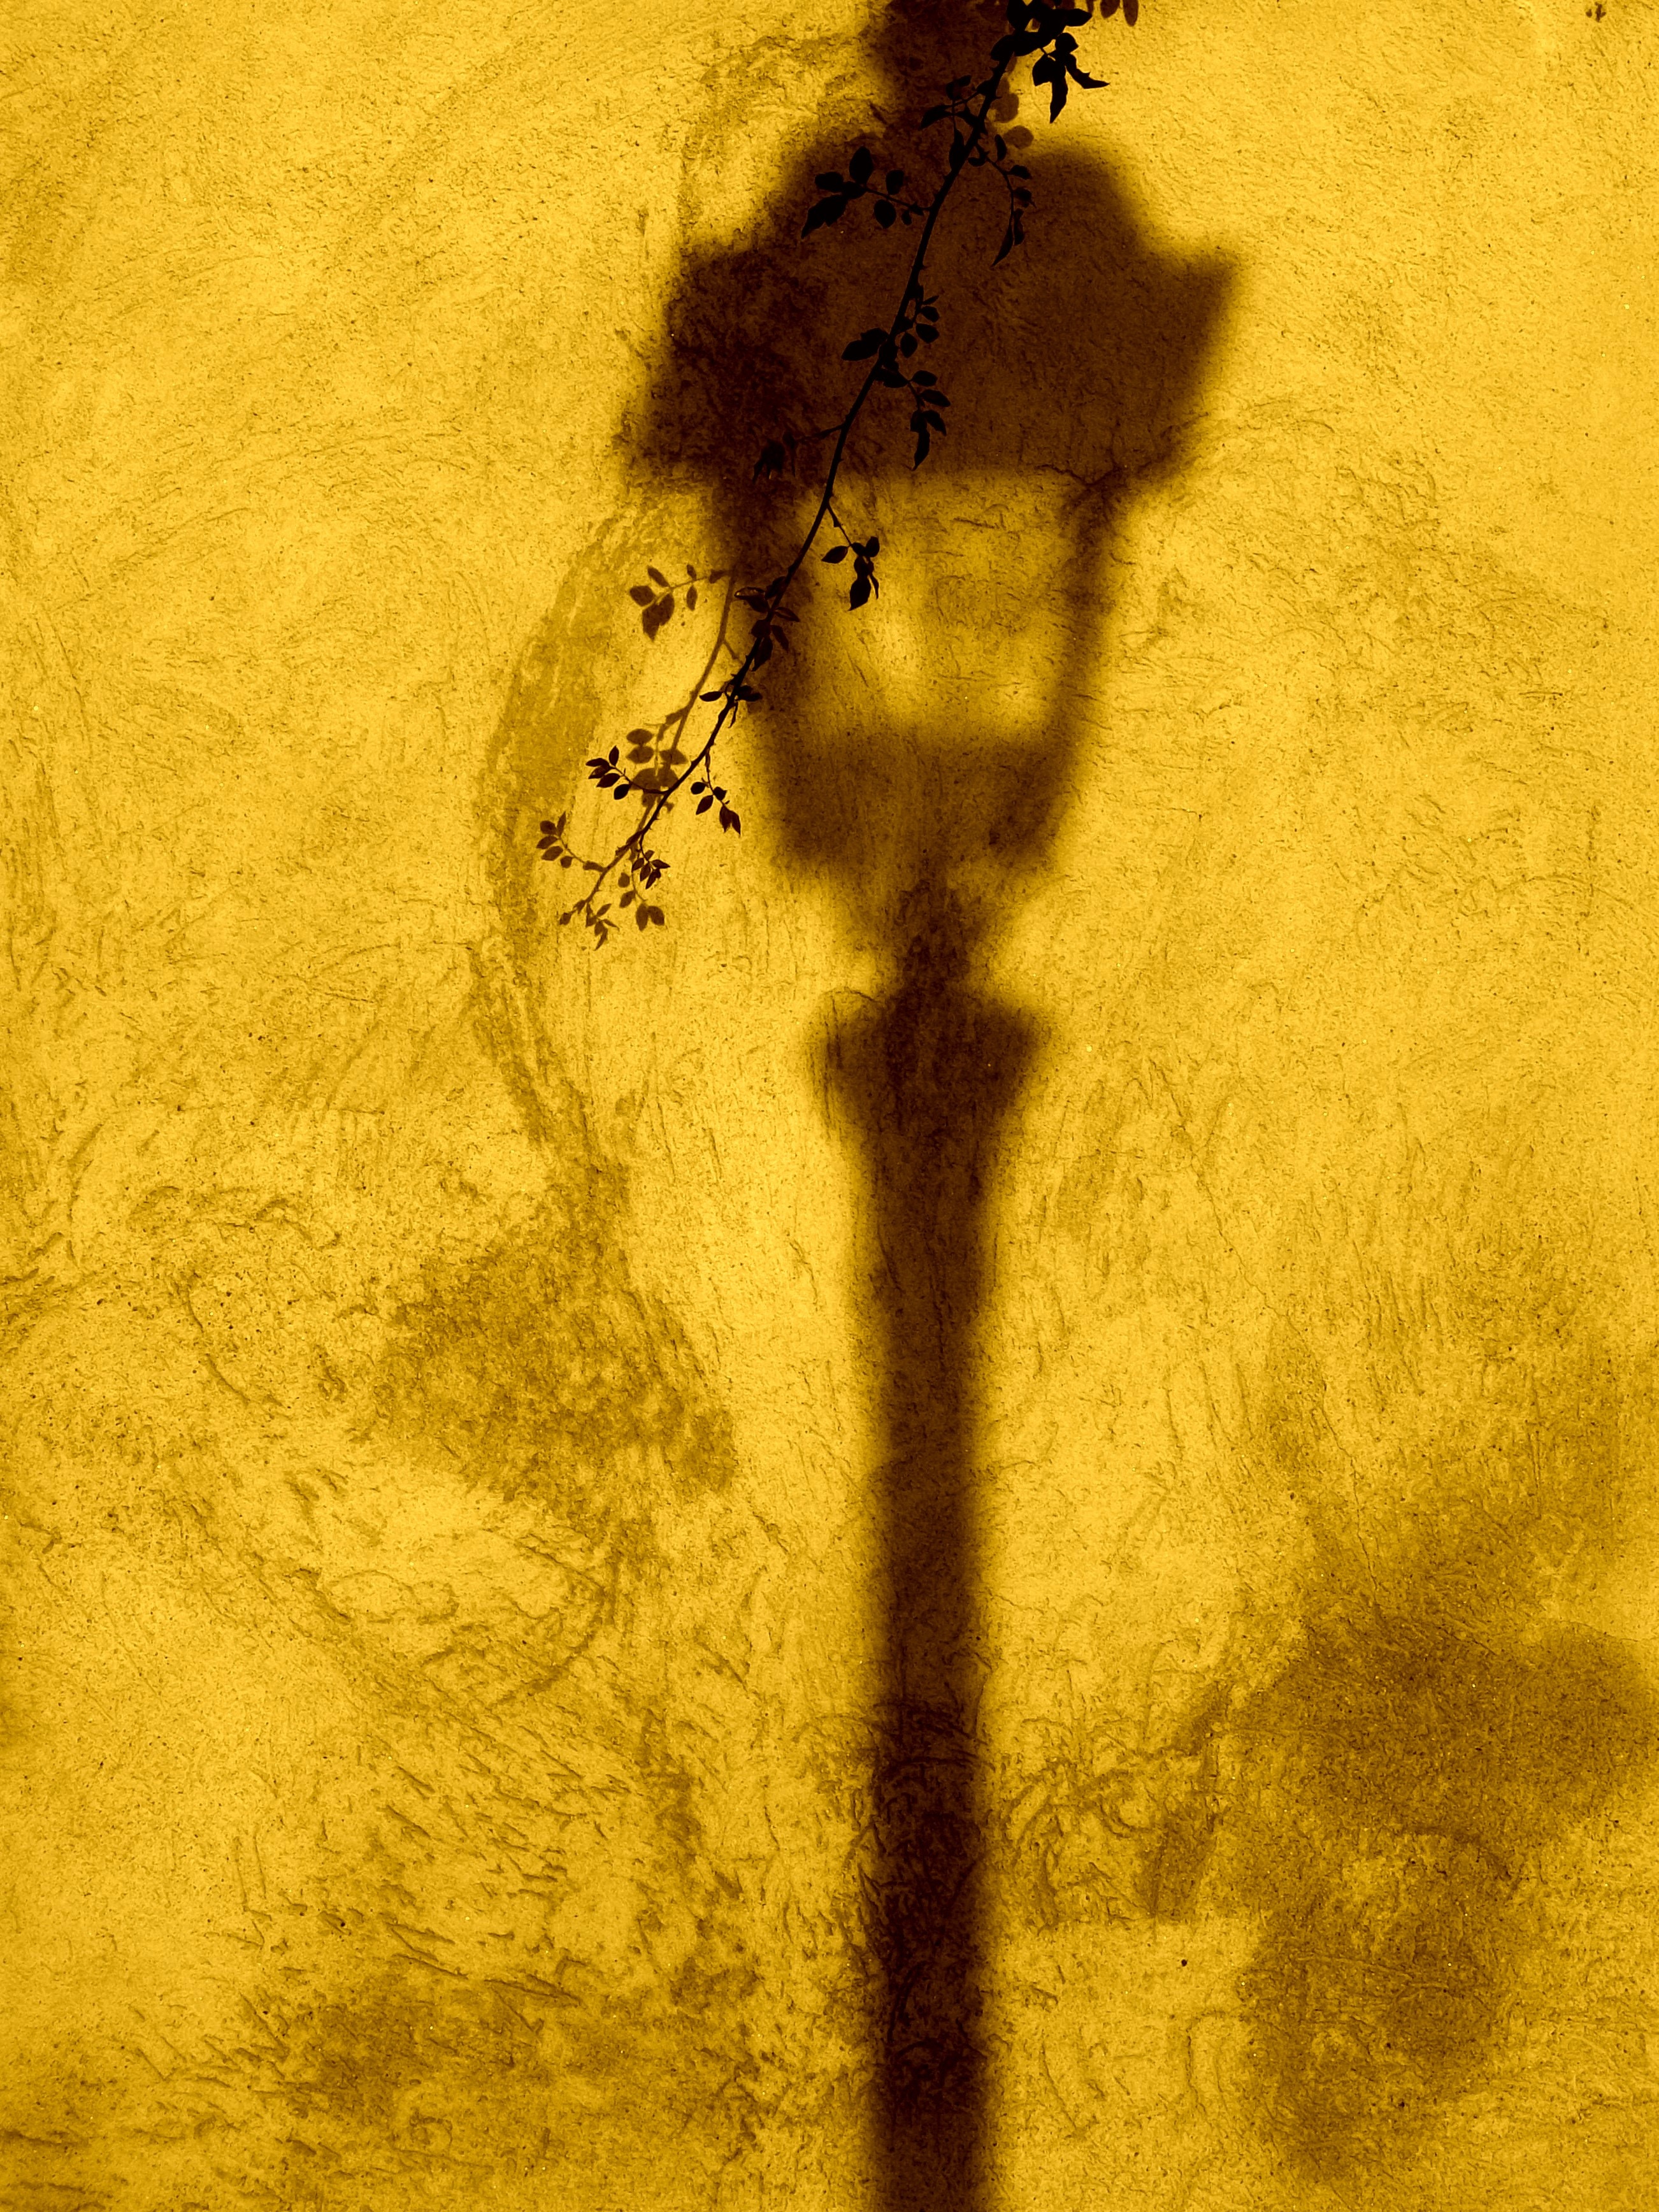 lantern, lamp, yellow, texture, textures, branch, shadow, wall cell phone wallpapers